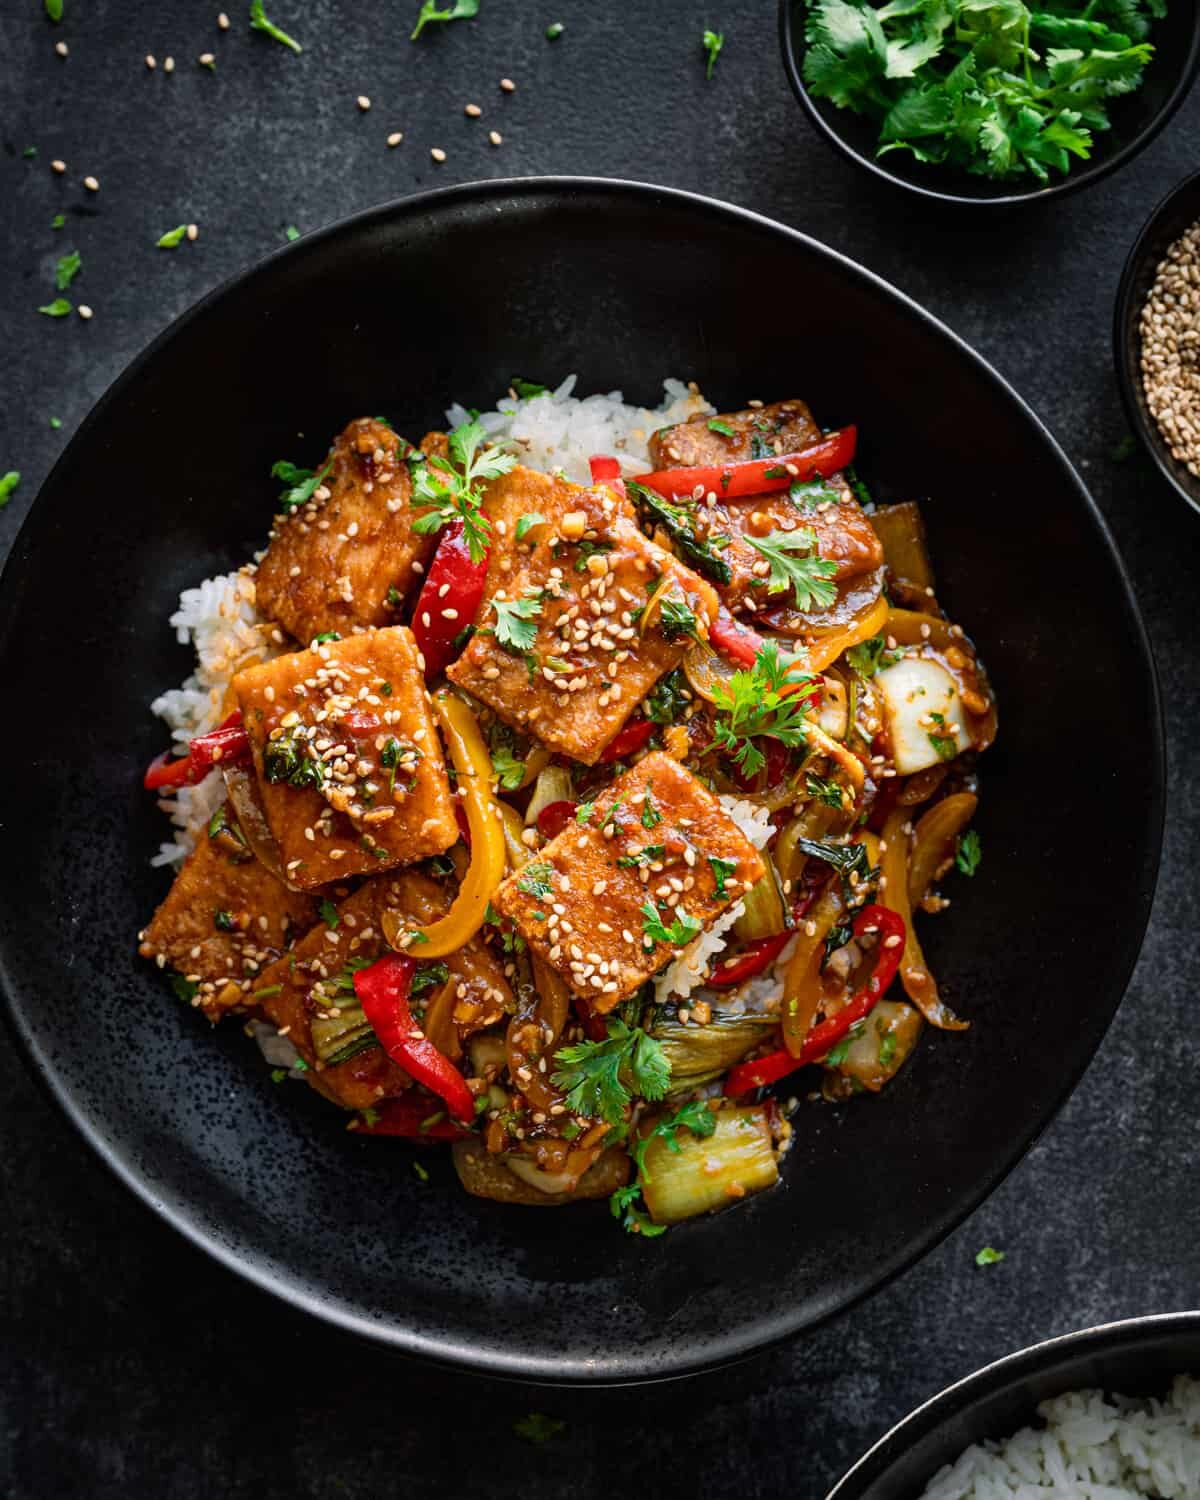 A vegan stir fry recipe featuring tofu and vegetables served over rice.